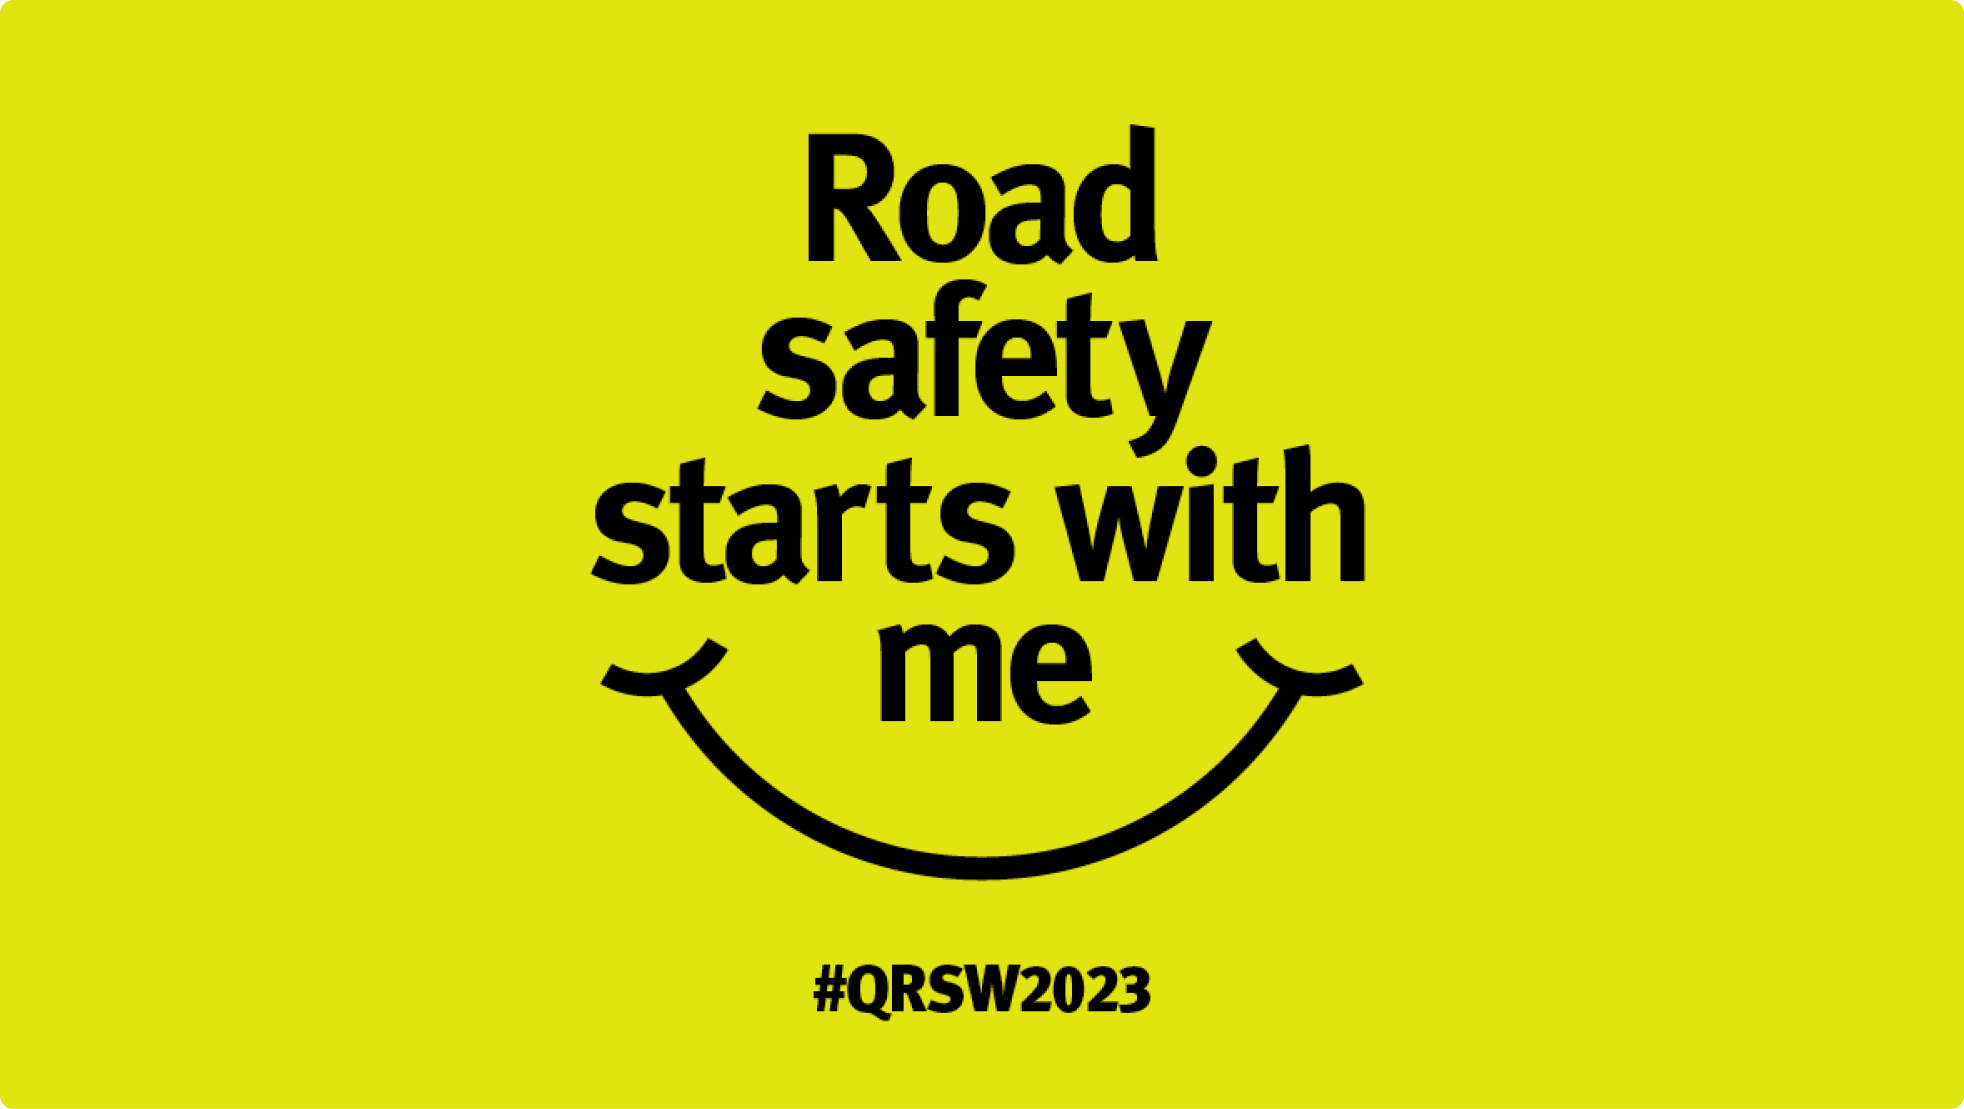 Road safety starts with me #QRSW2023